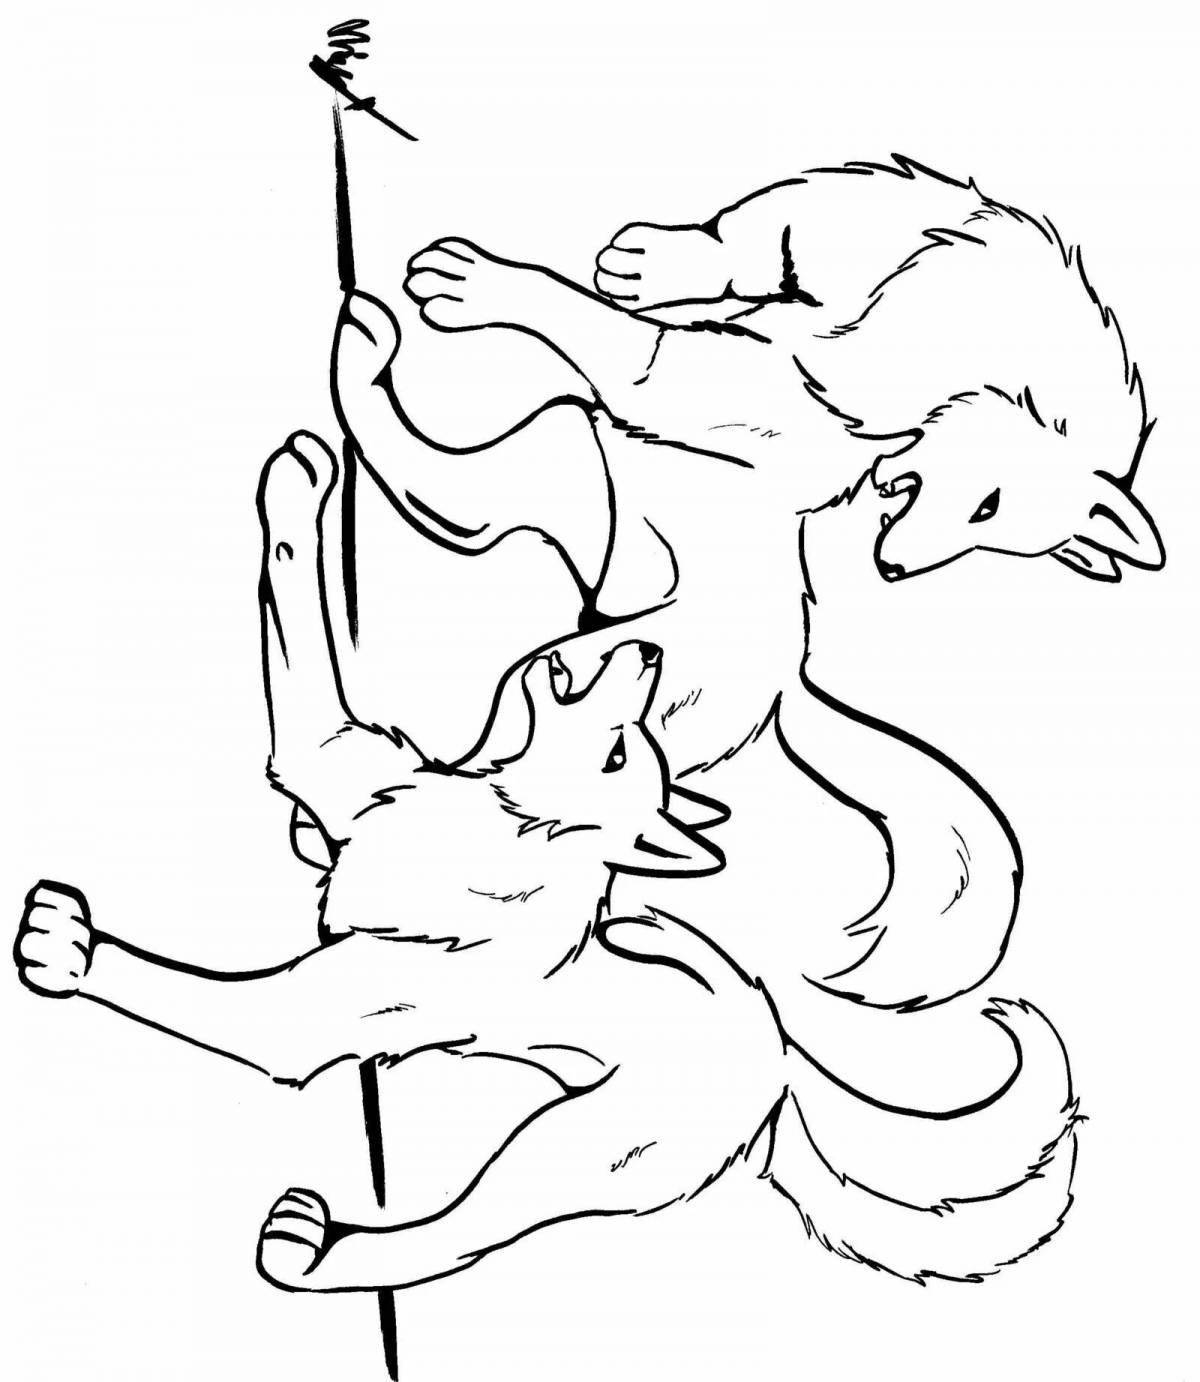 Courageous warrior cats coloring page